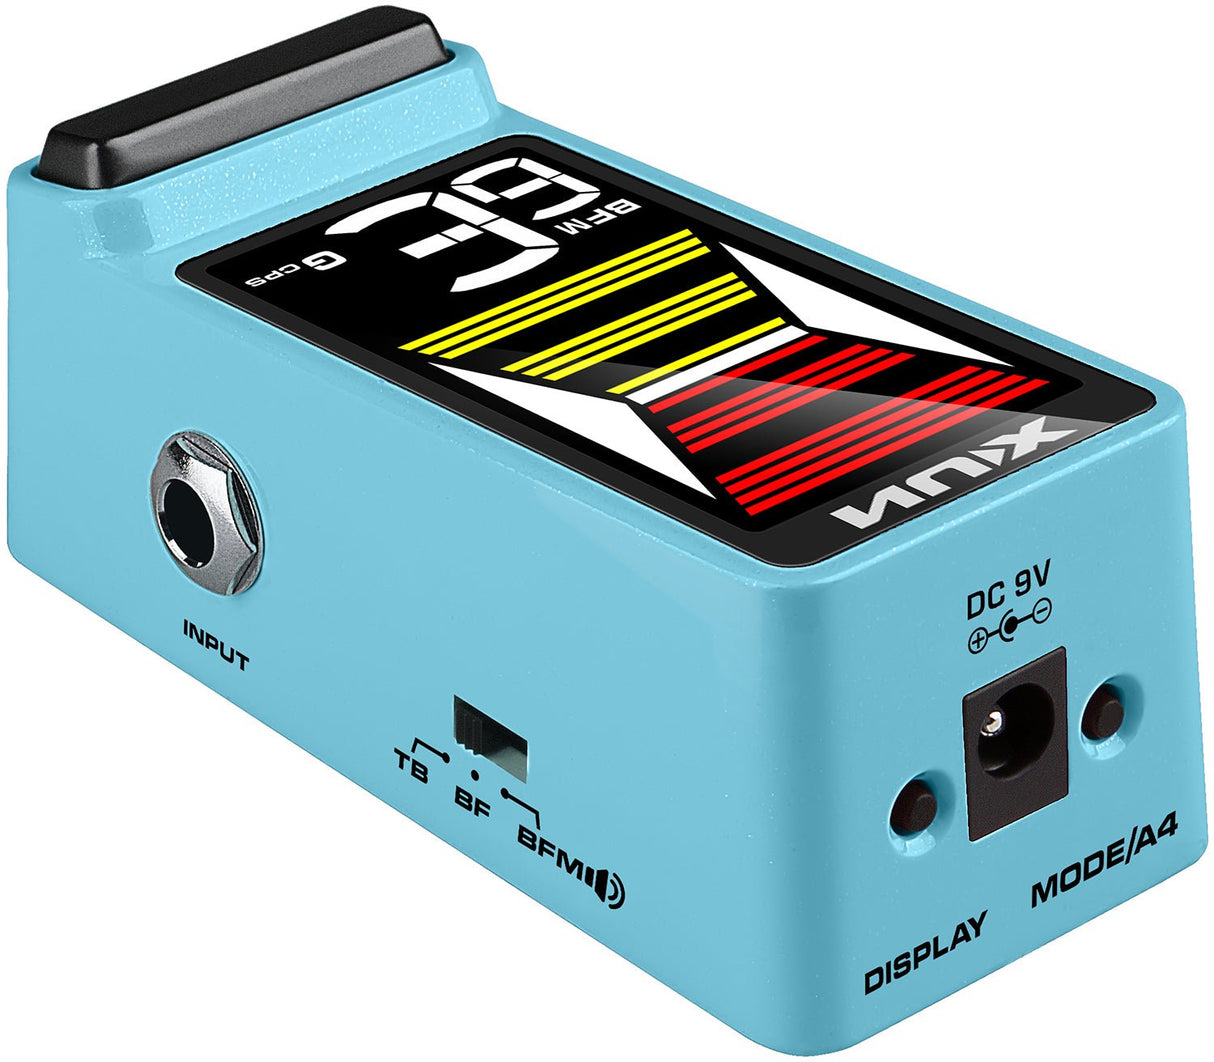 NU-X Flow Tune Pedal - Effects Pedals - NU-X